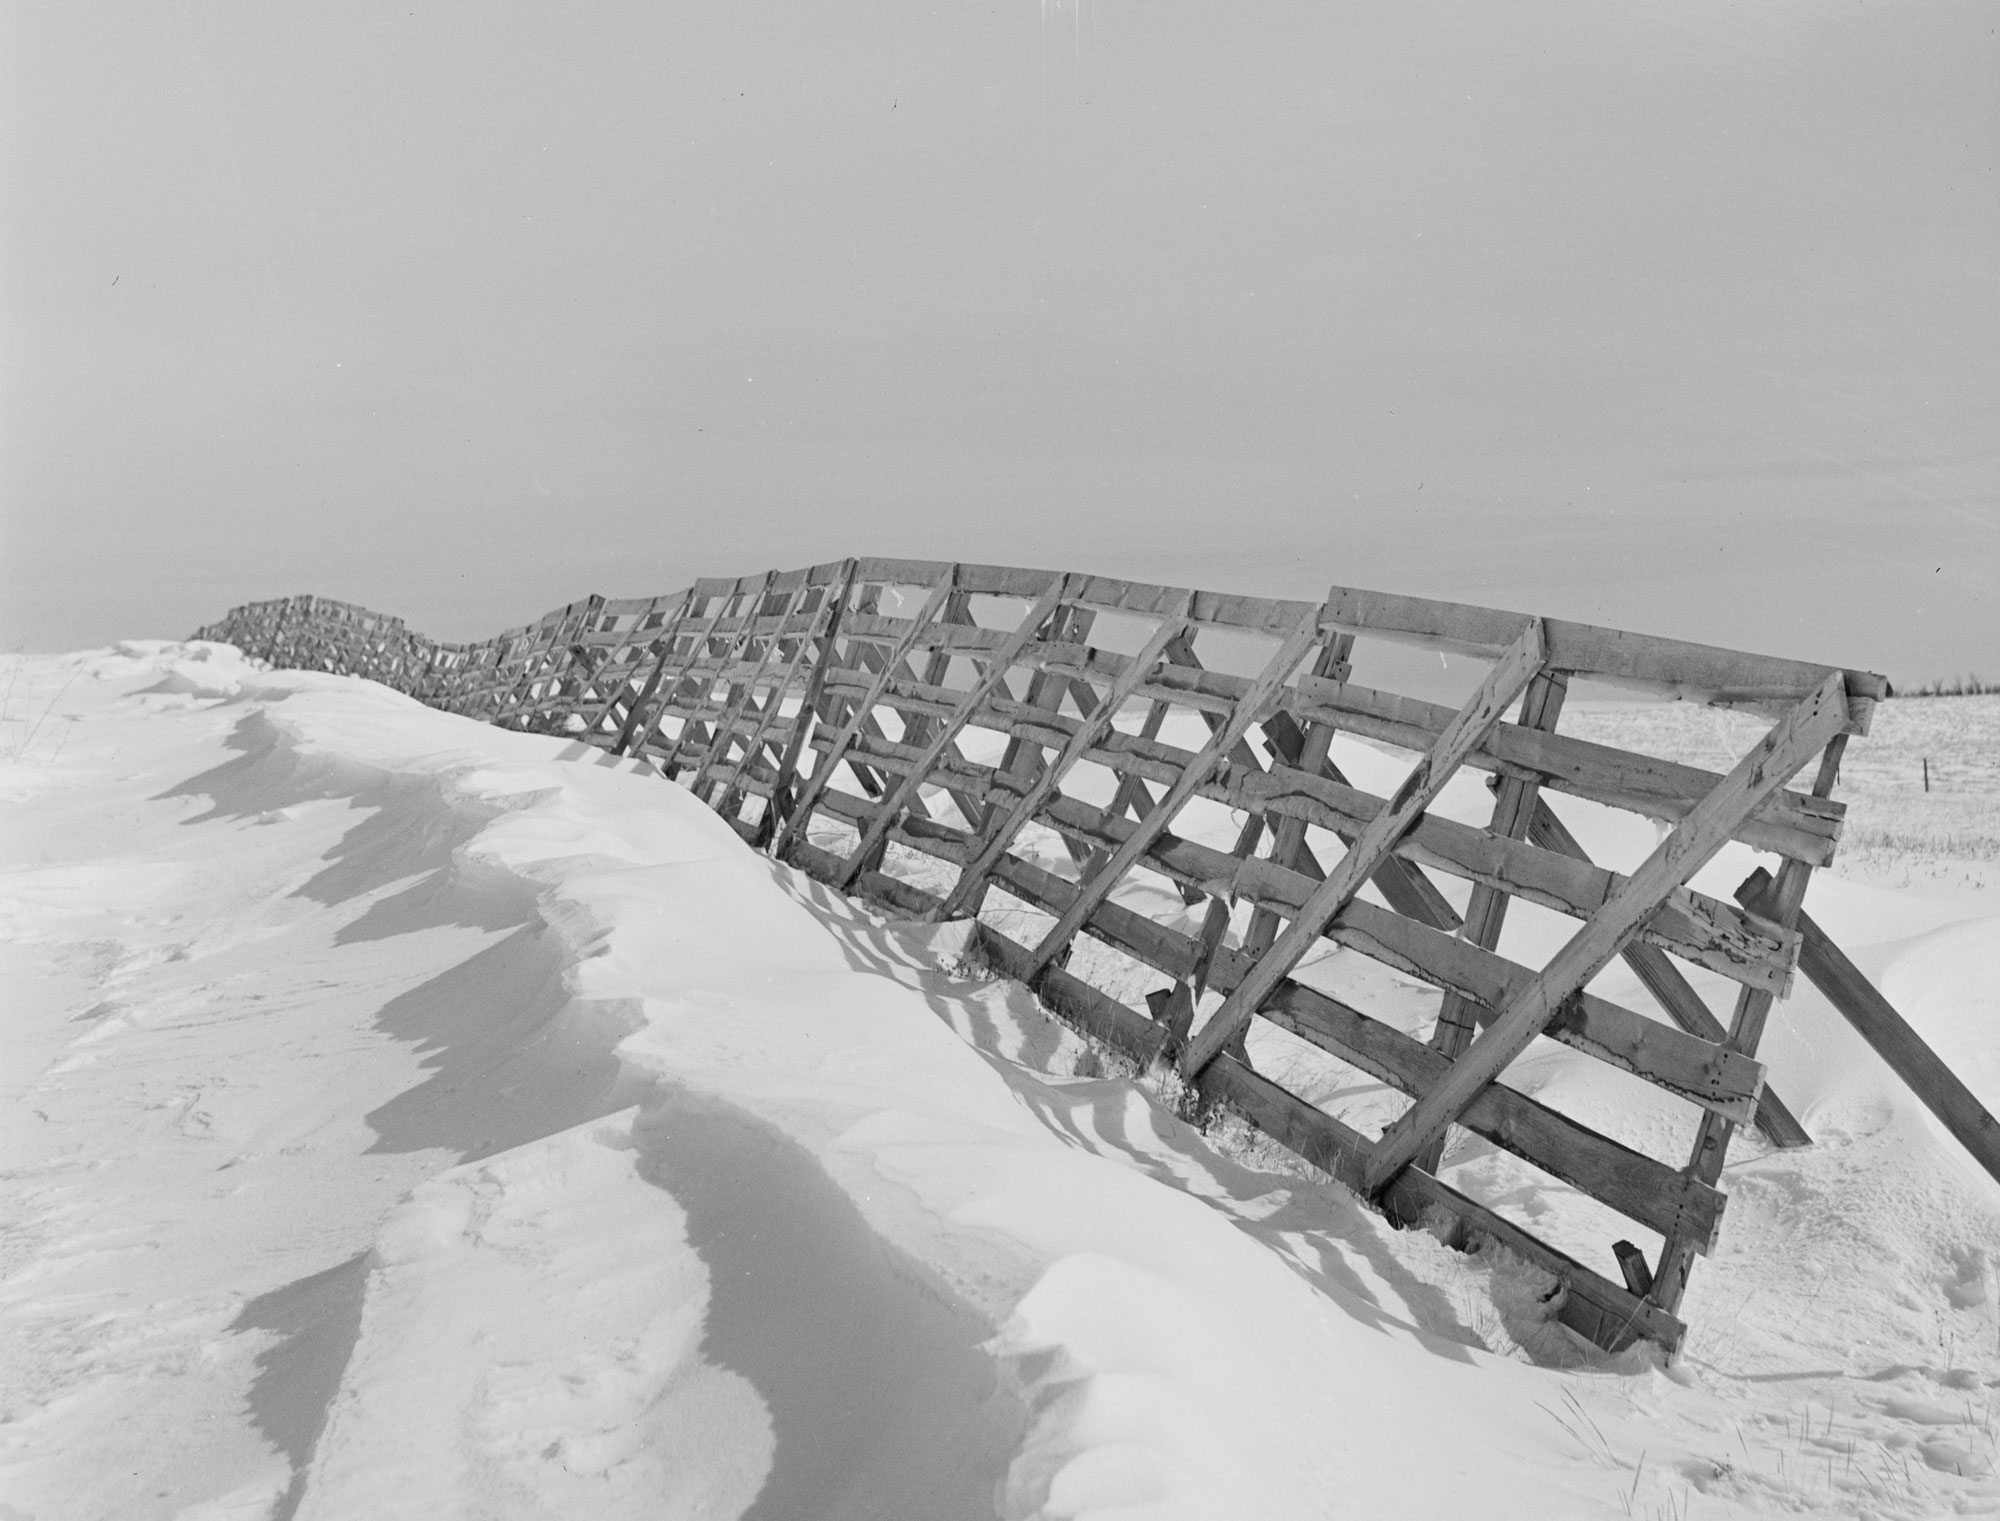 Black and white photograph of a wooden snow fence in North Dakota taken in 1942. The photo shows a fence made up of a series of panels. Each panel has three upright boards, six widely spaced horizontal boards, and two diagonal boards. The panels are each propped up by additional boards used as supports. The fence begins at the lower right and travels toward the left horizon. Snow is mounded along the near side of the fence.